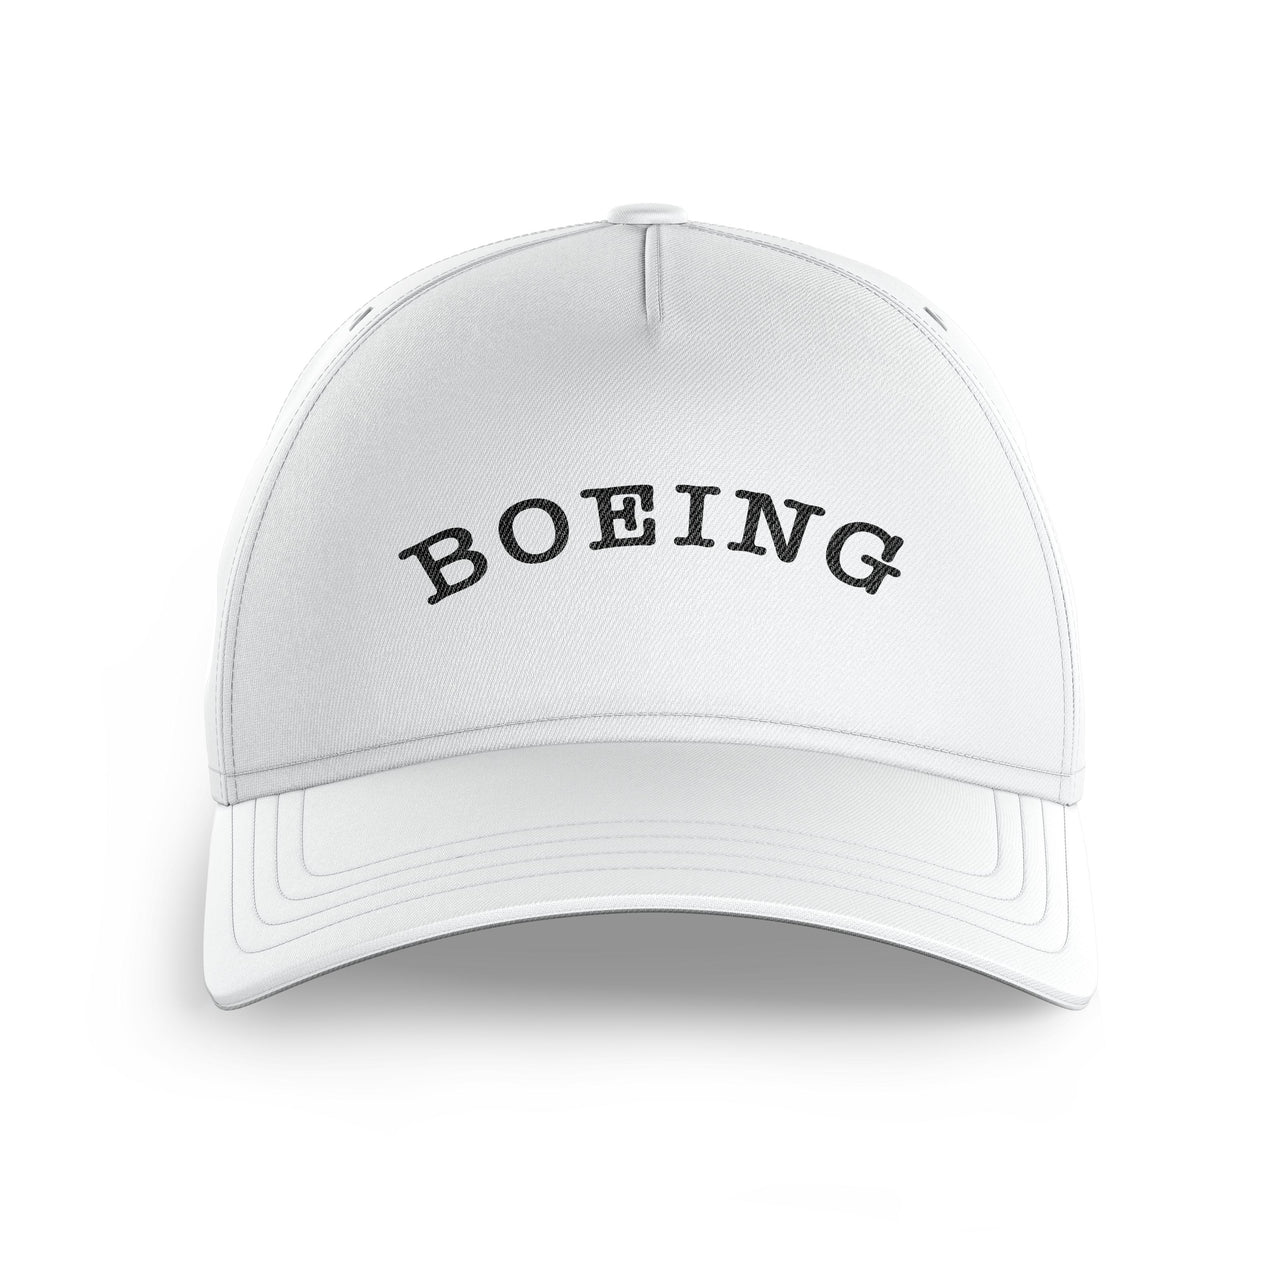 Special BOEING Text Printed Hats